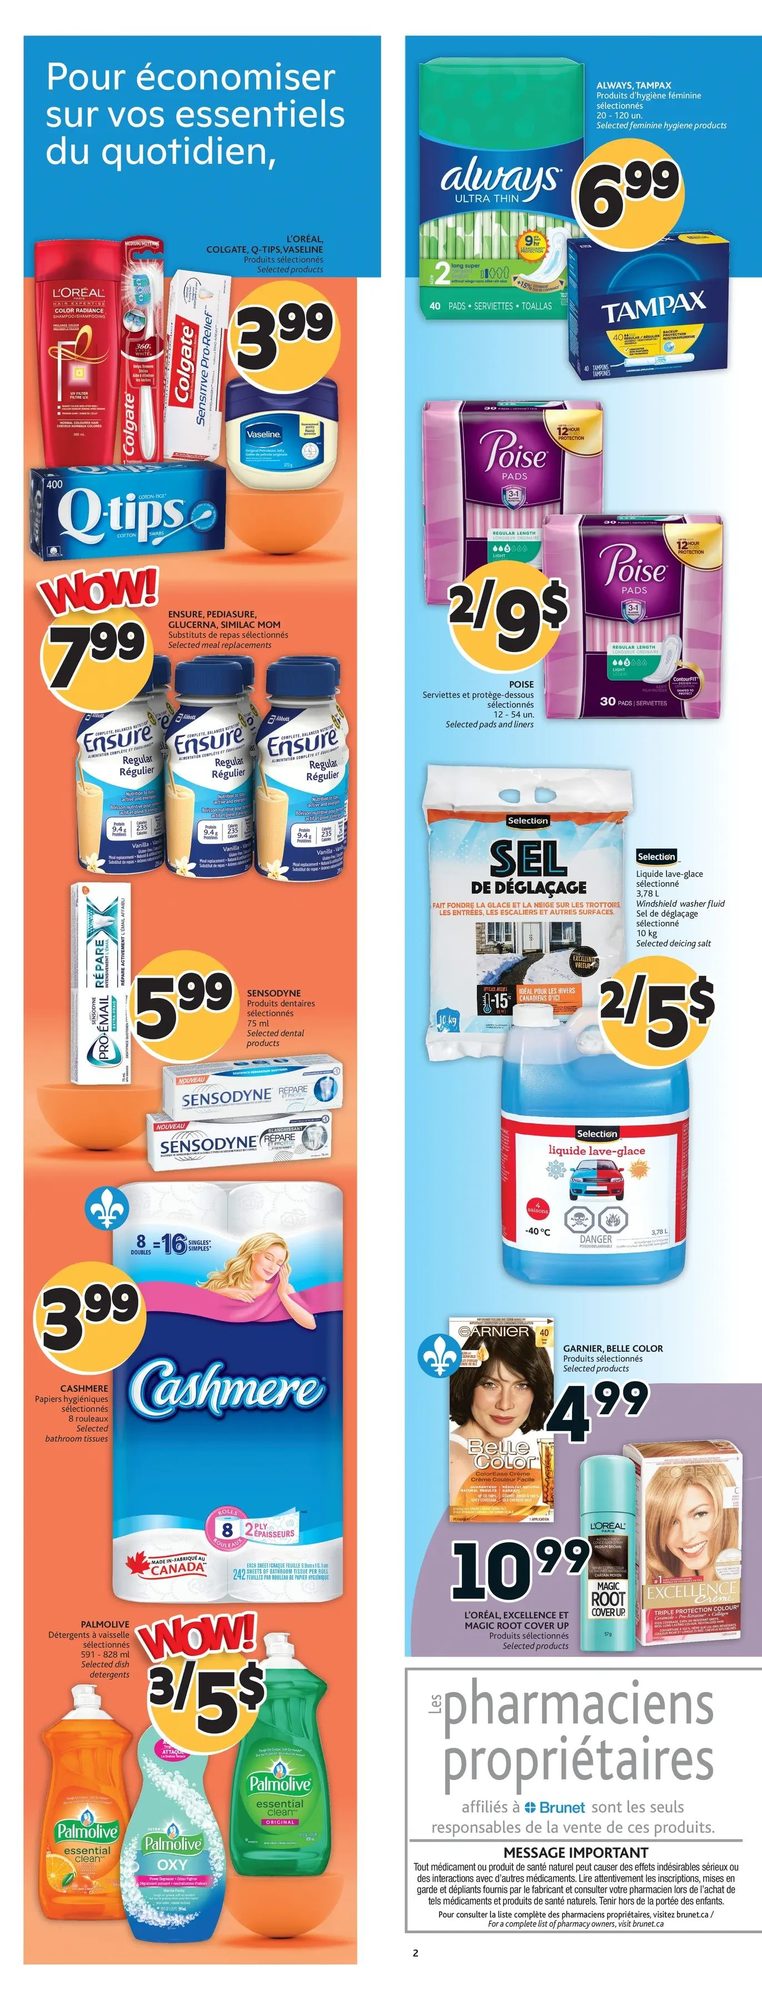 Brunet - Weekly Flyer Specials - Page 2